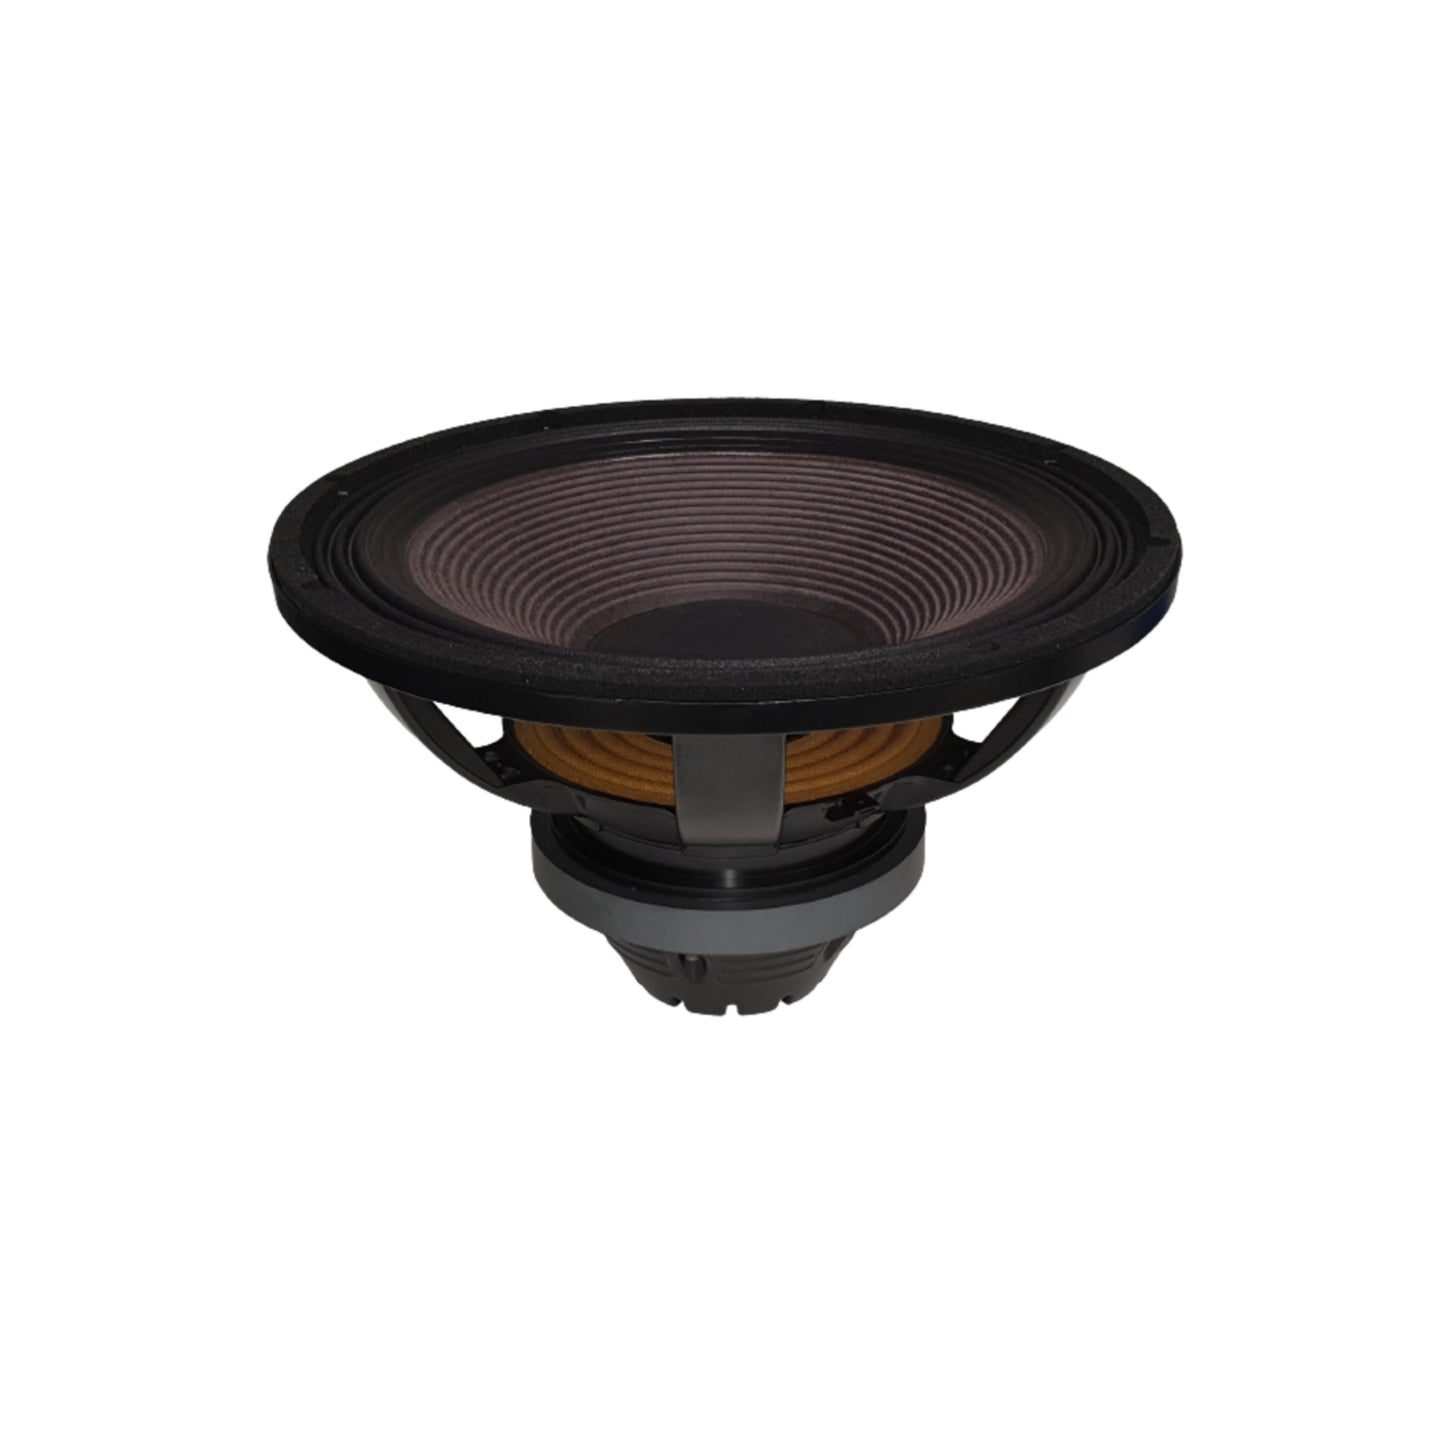 18 Sound 18TLW3000 18” Dual Voice Coil Woofer